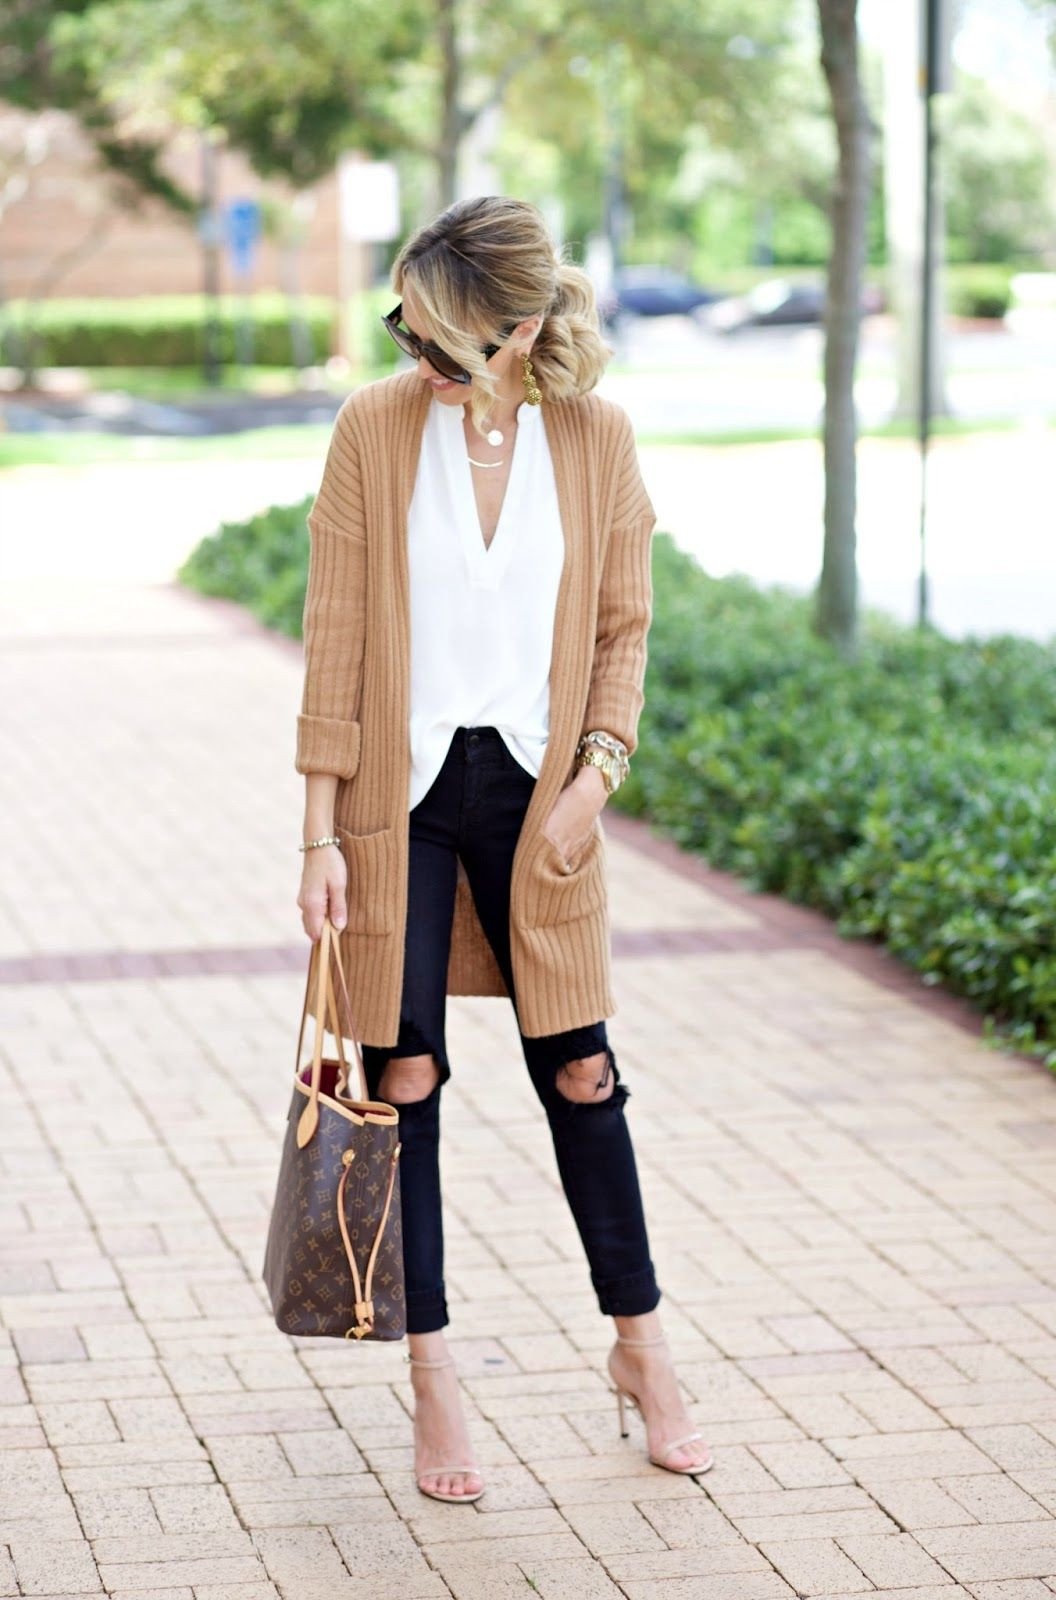 Women Fall Outfit Ideas
 21 Easy Fall Outfit Ideas for Women Fazhion